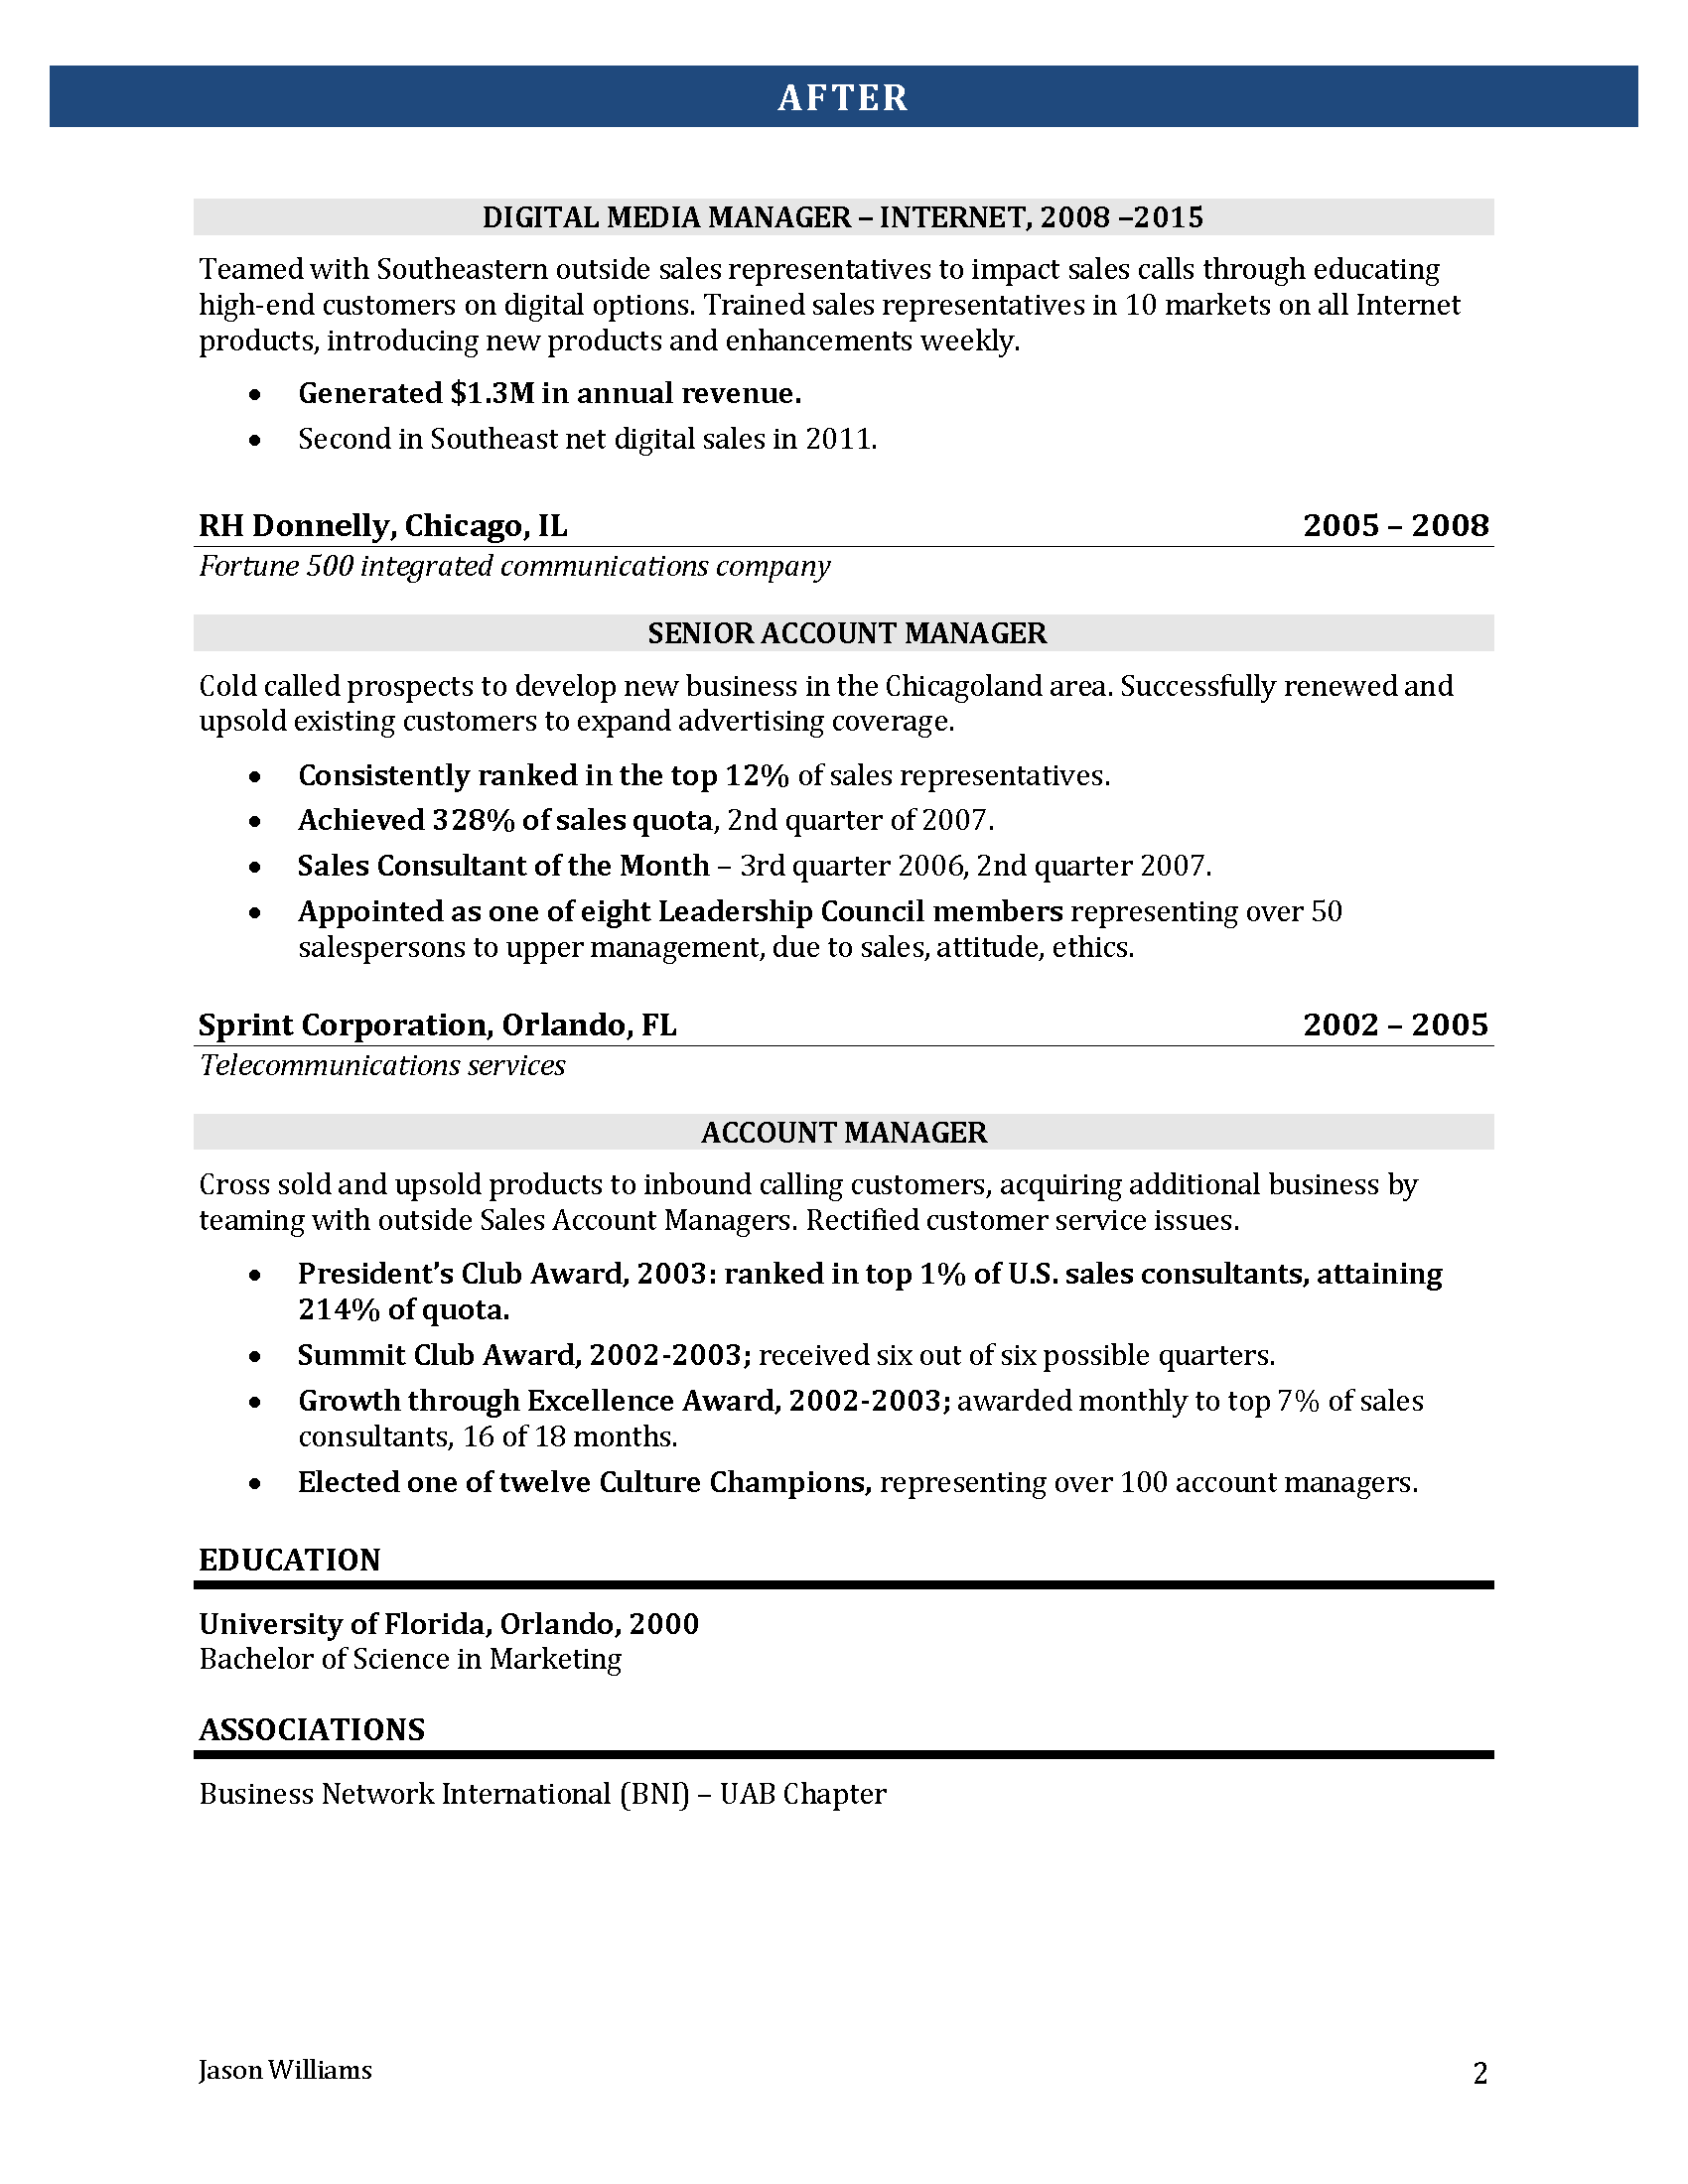 Jason Williams AFTER Resume Page 2